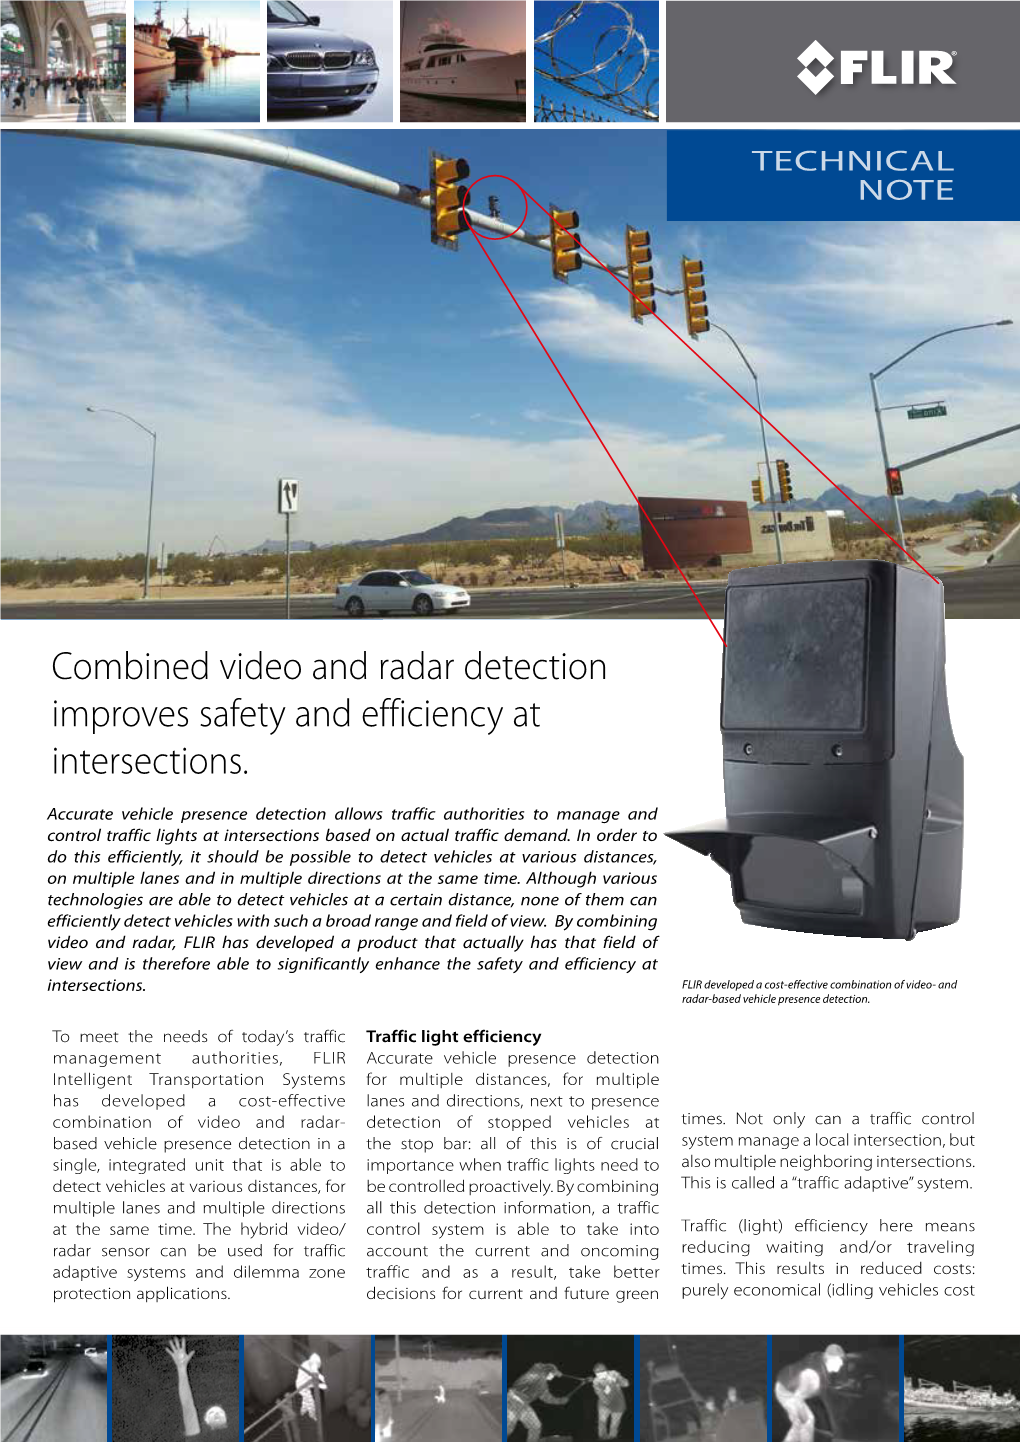 Combined Video and Radar Detection Improves Safety and Efficiency at Intersections